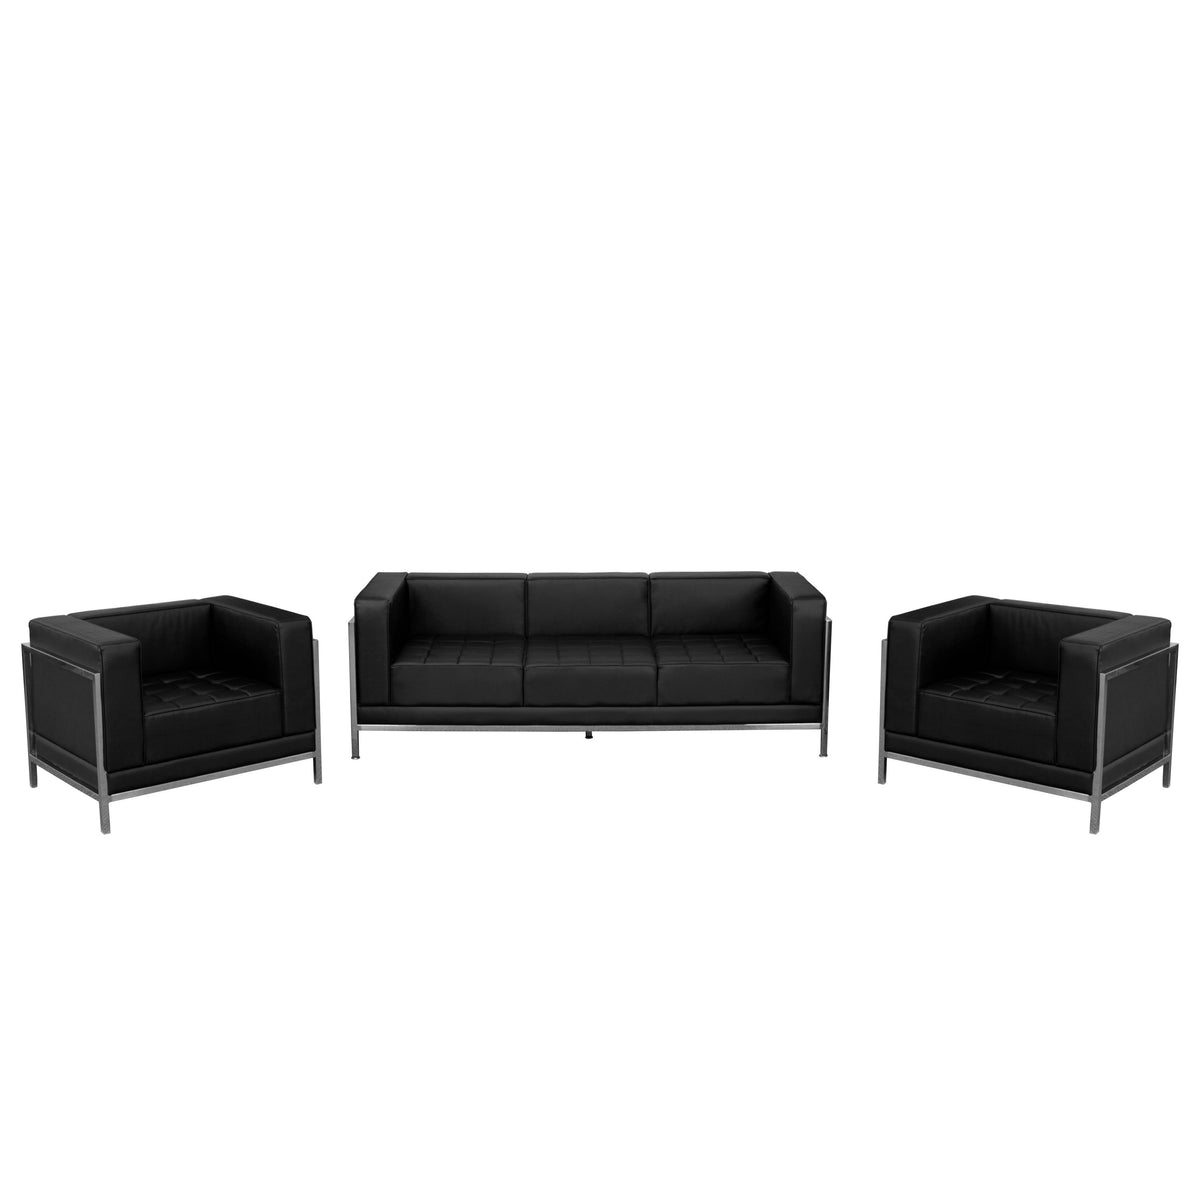 Black LeatherSoft Modular Sofa & Chair Set with Taut Back and Seat